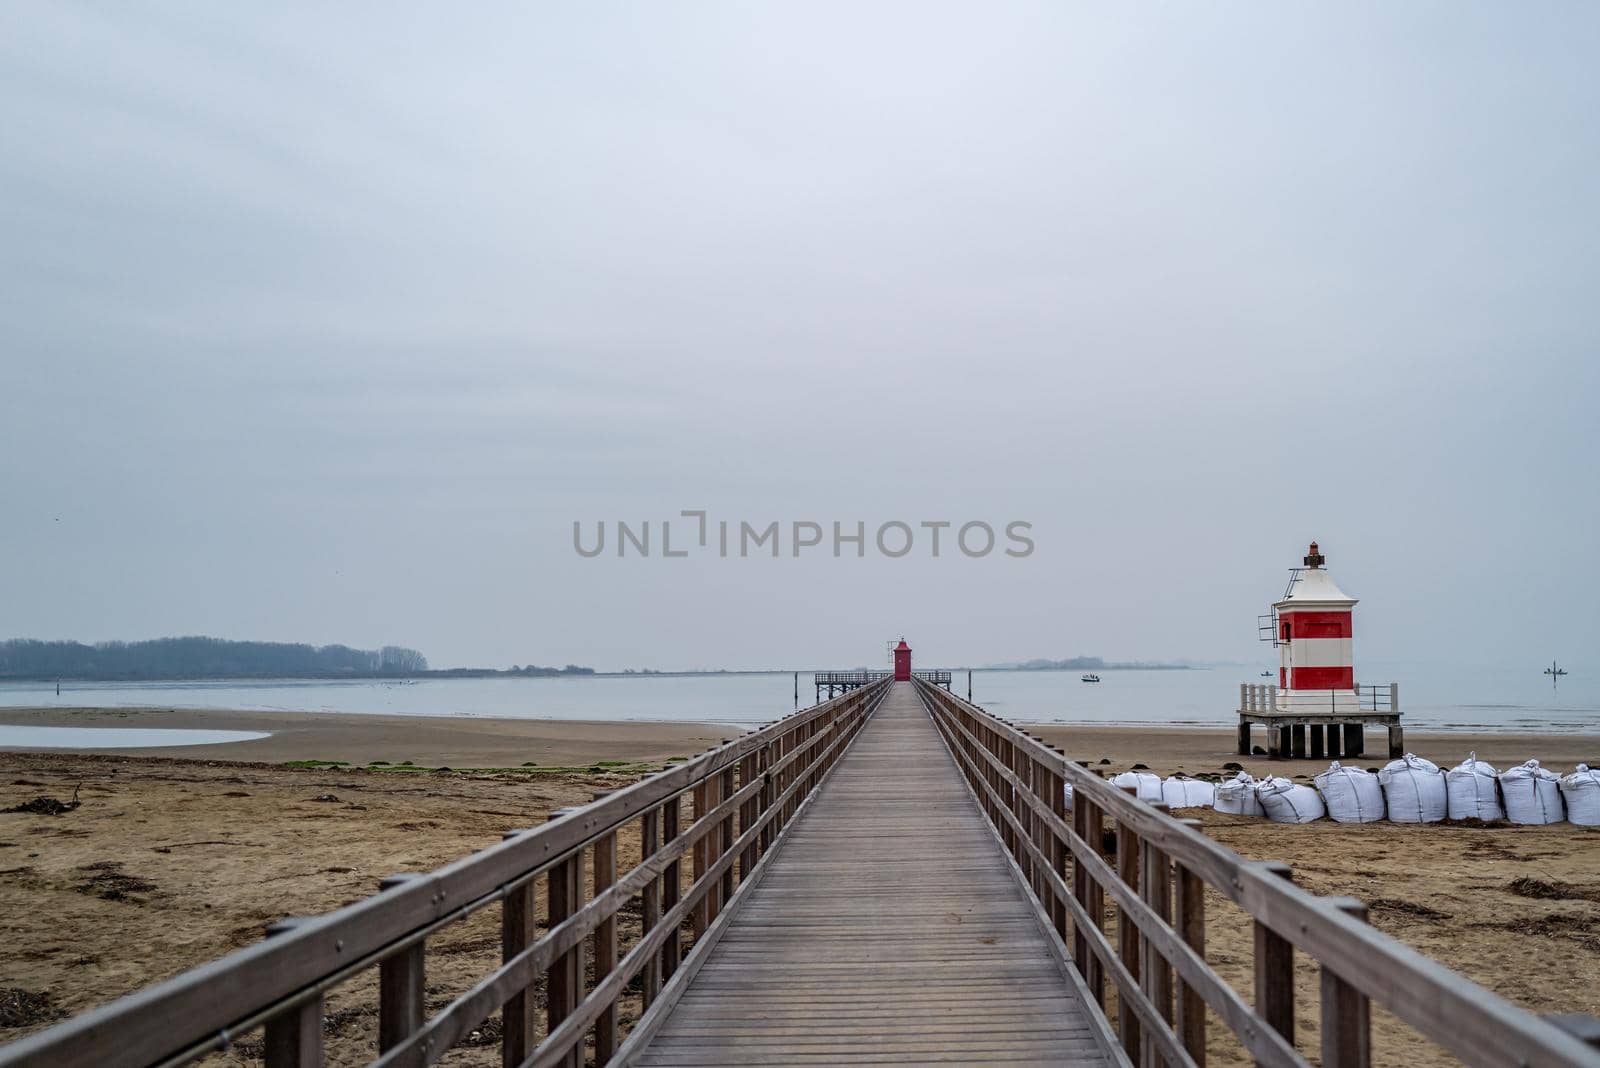 Small red and white wooden lighthouse on a wintry sandy beach next to a wooden jetty without people.